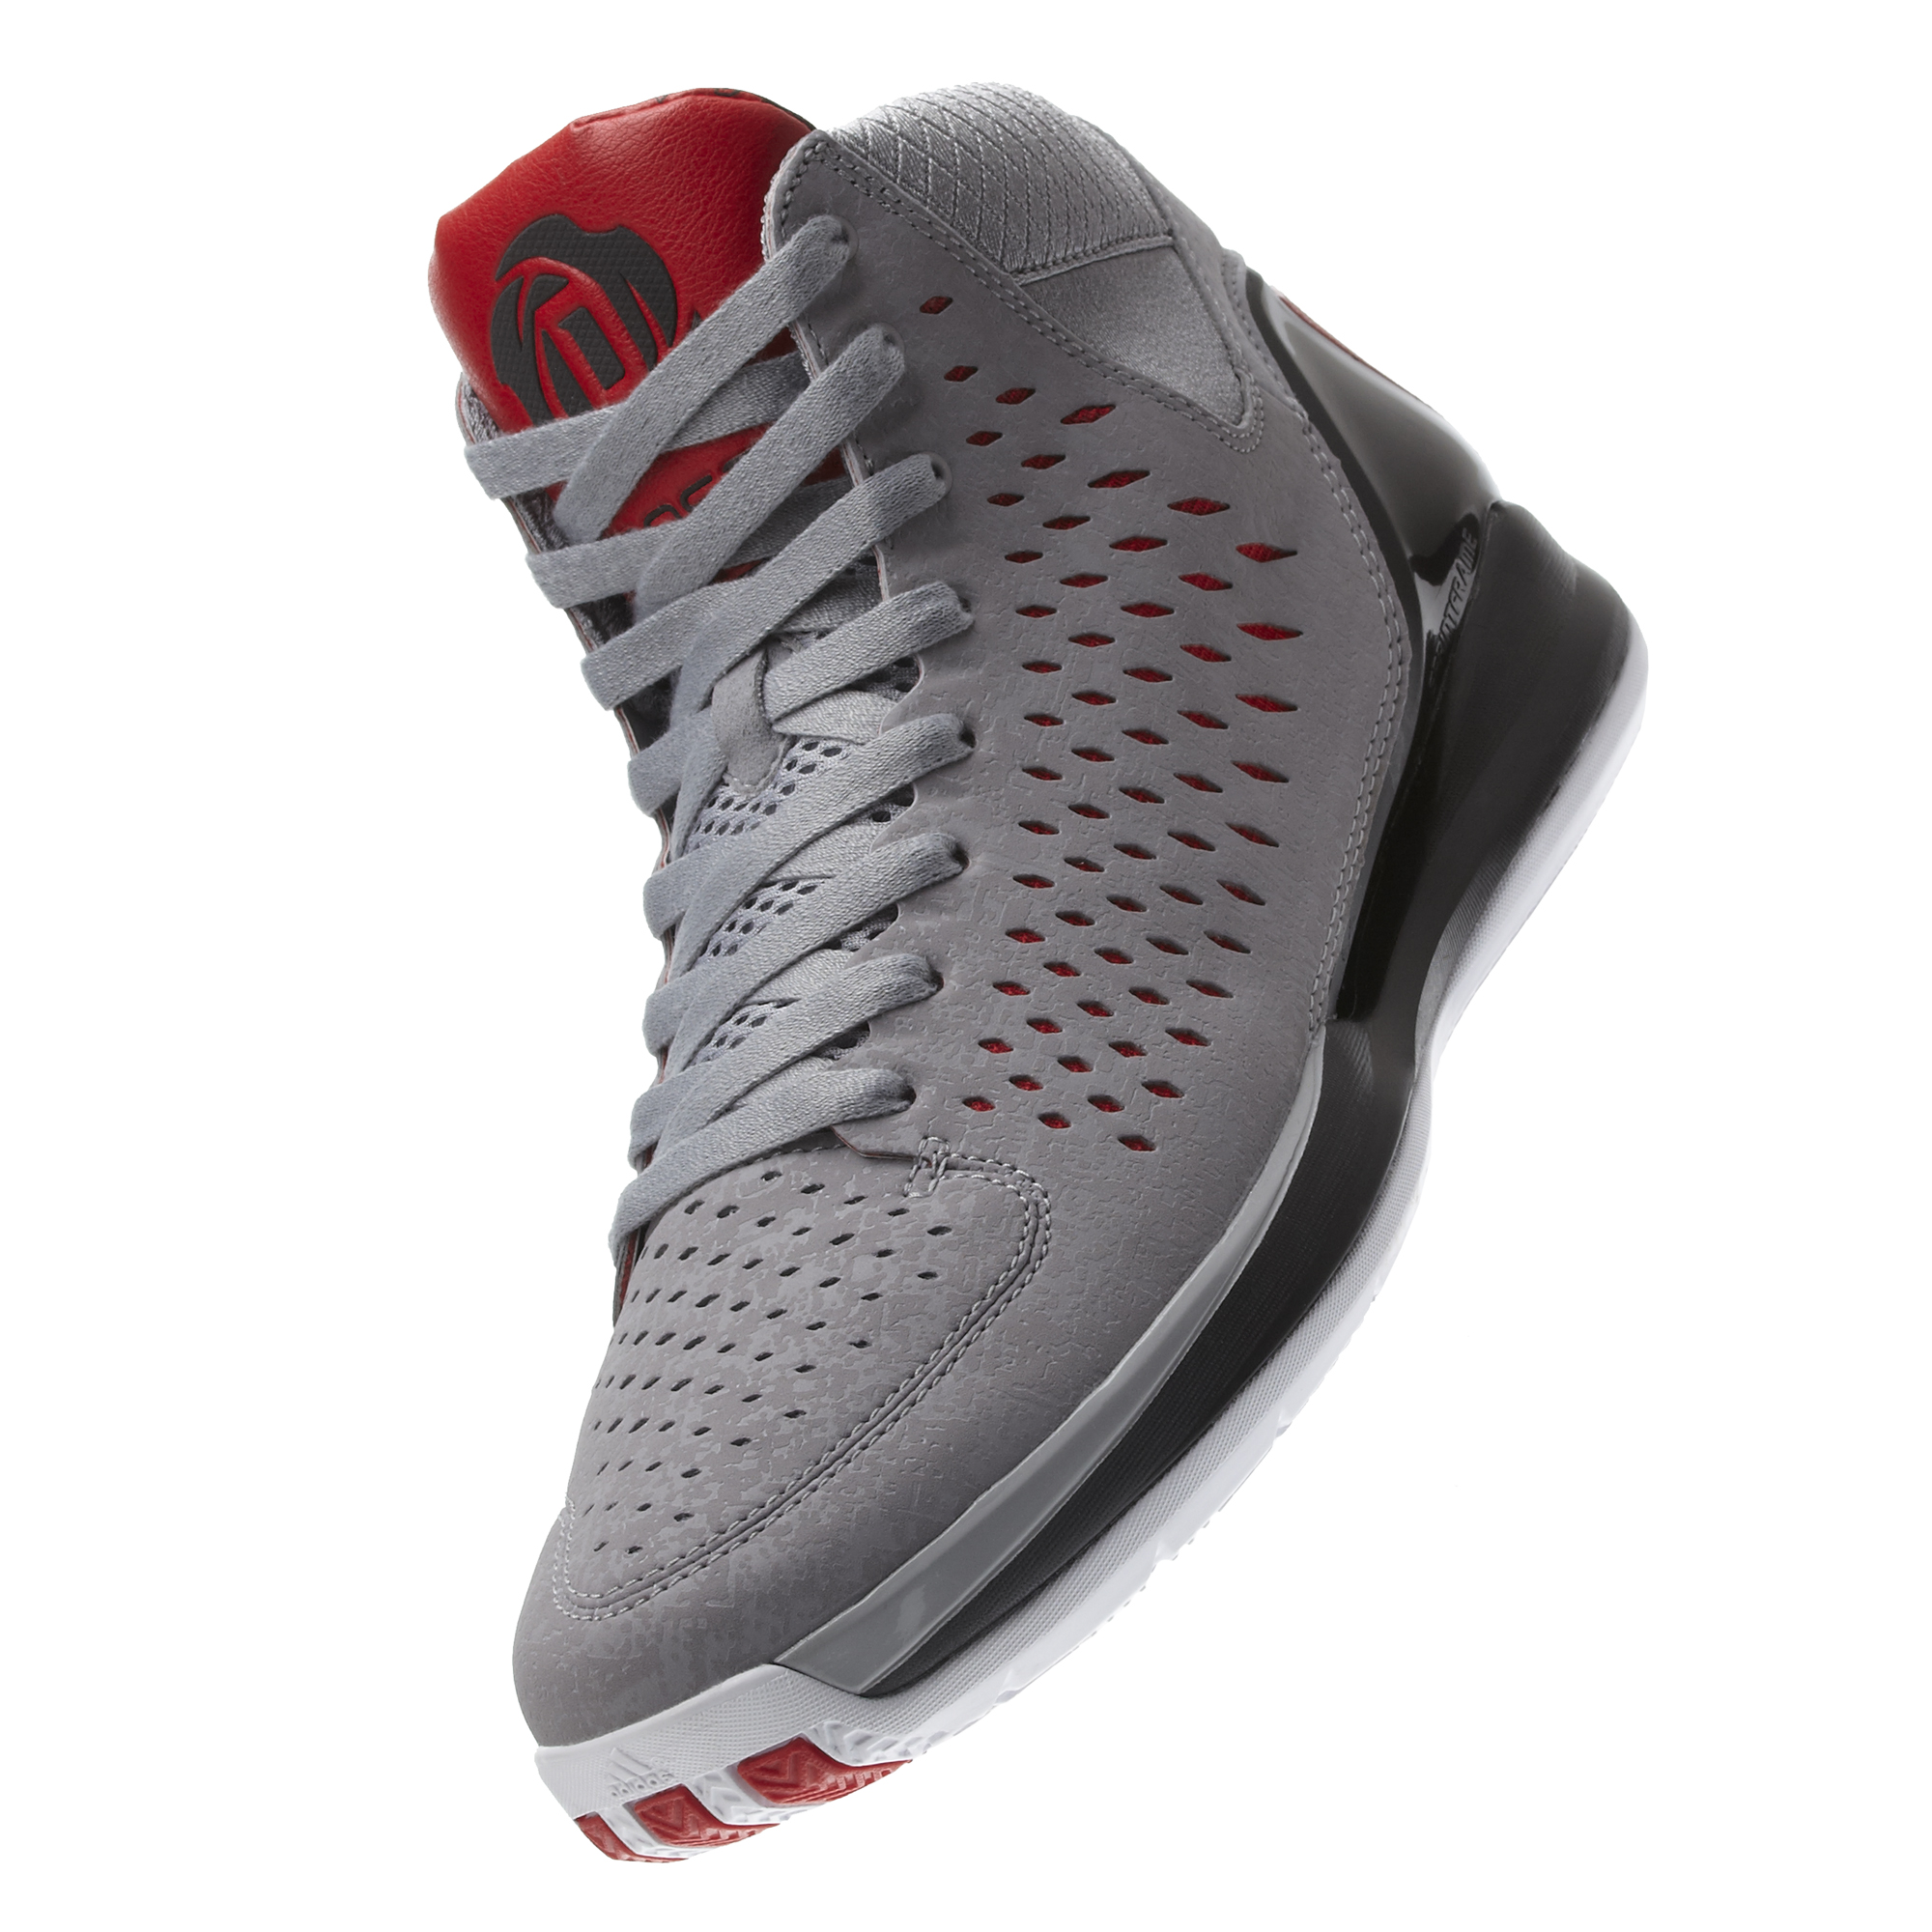 adidas derrick rose shoes price in philippines